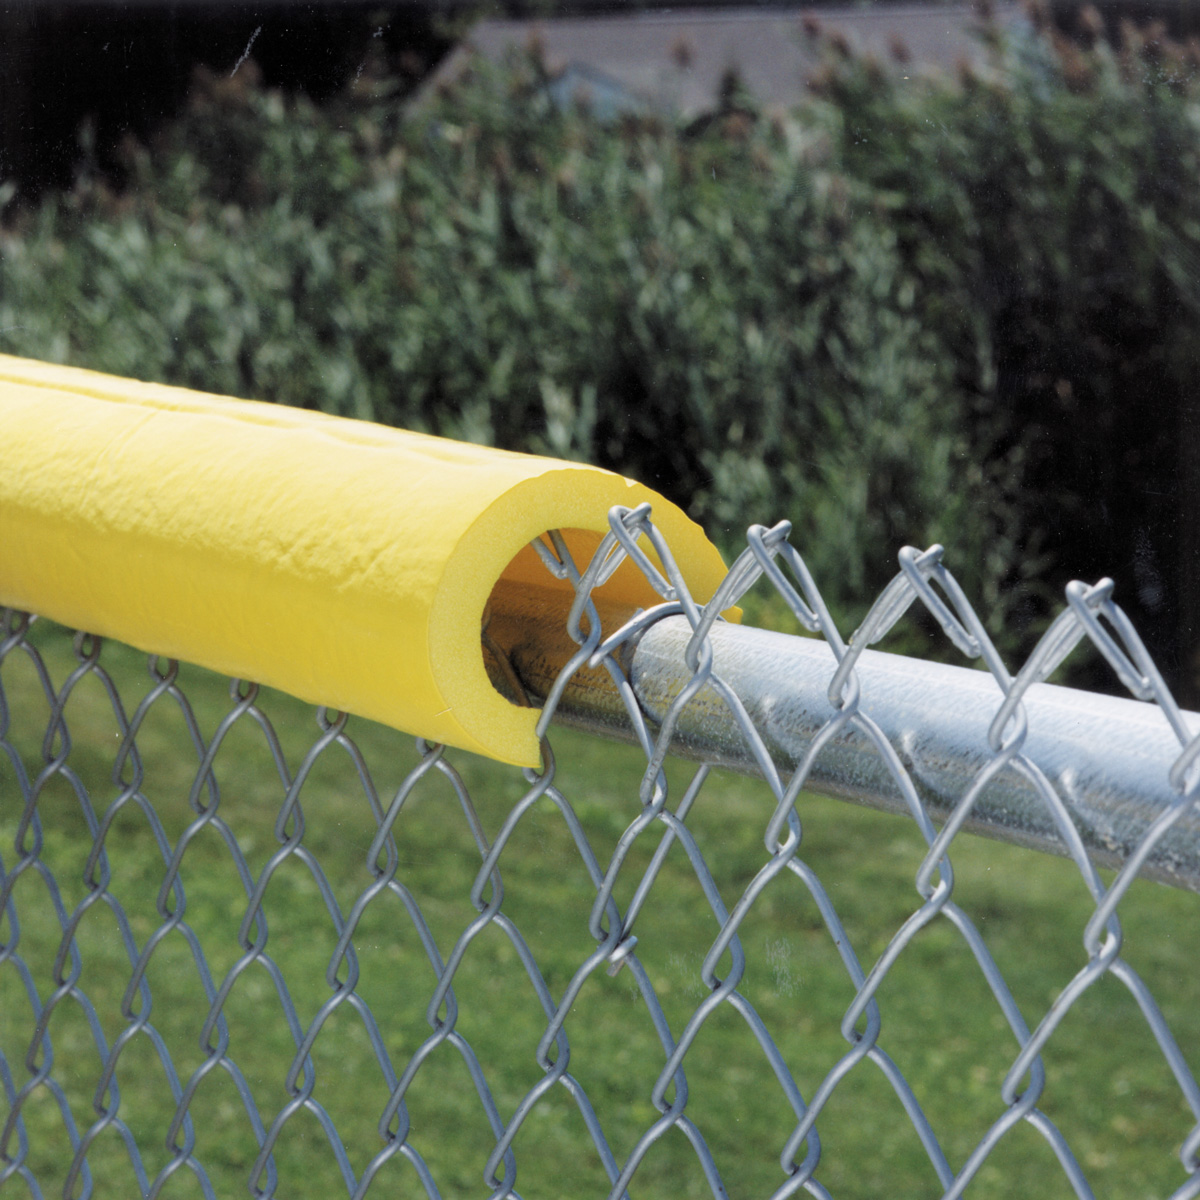 foam on top of chain-link fence for rail top padding